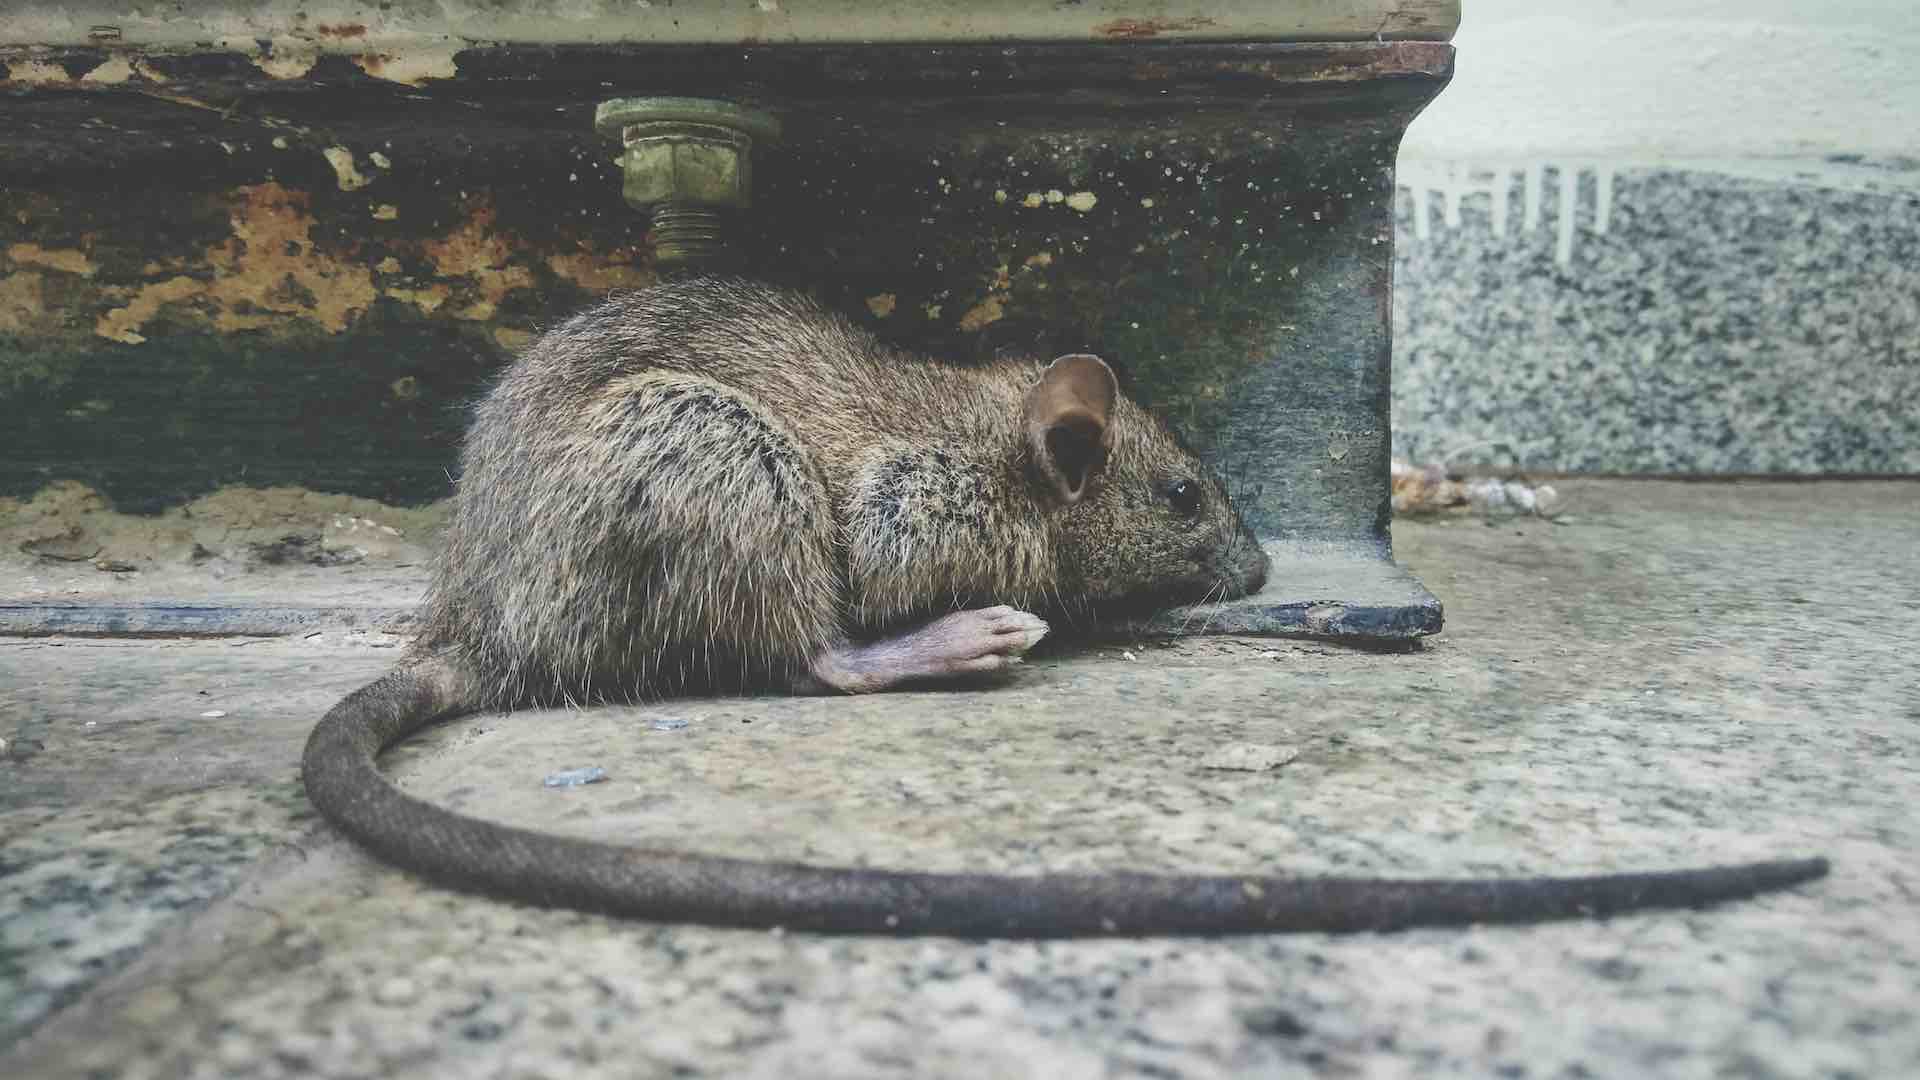 Health alert - rat urine tied to soaring cases in NYC streets